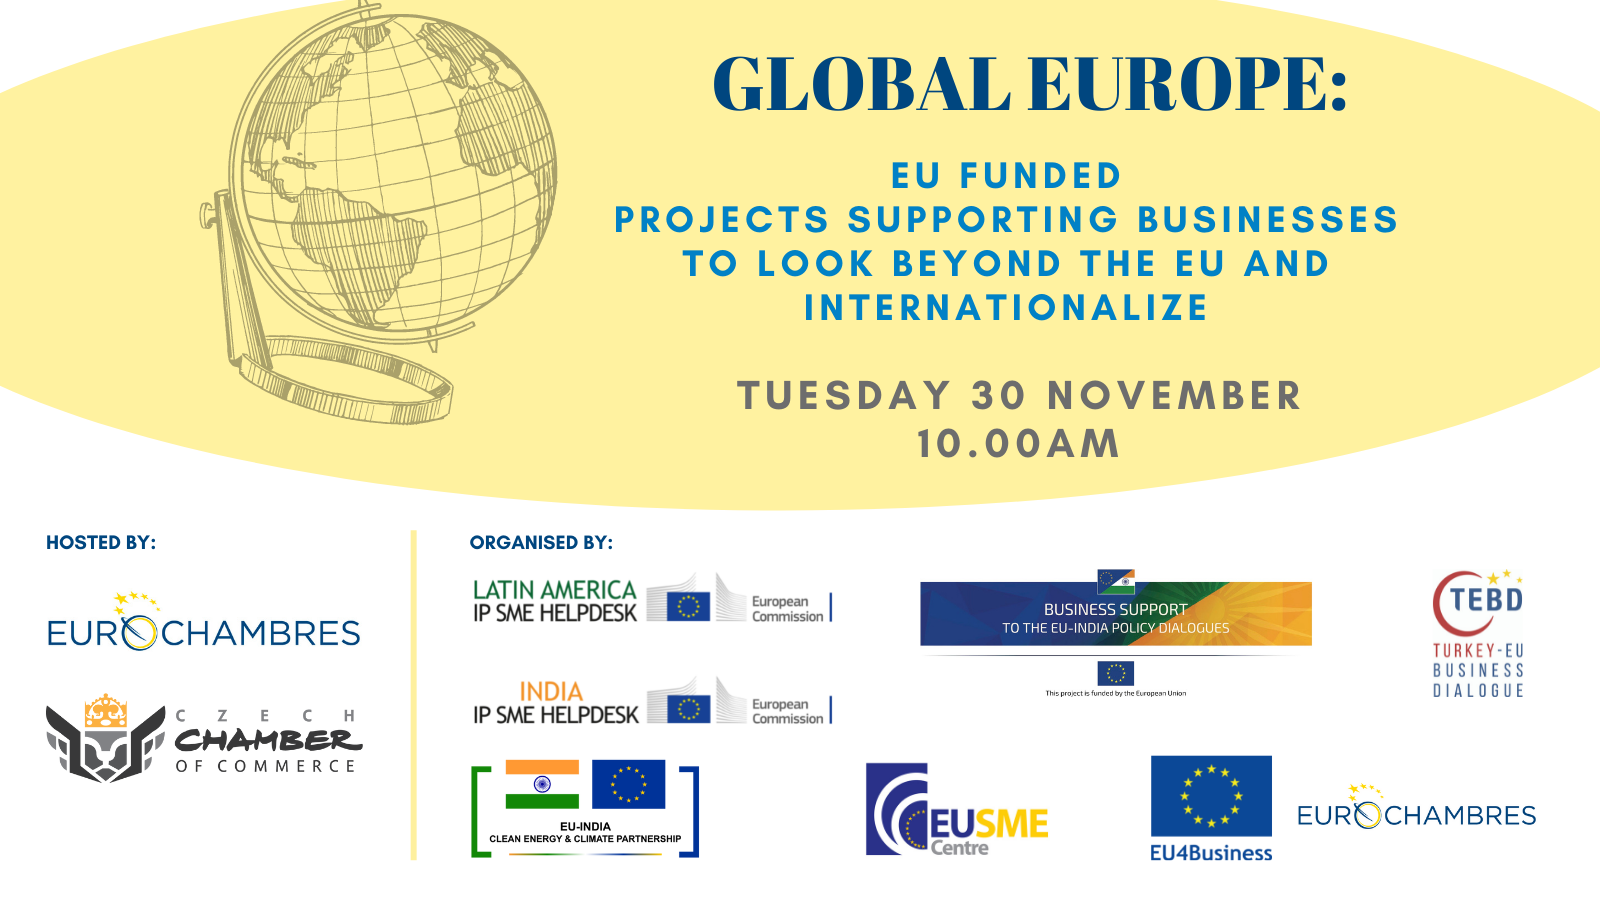 GLOBAL EUROPE - EU funded projects supporting businesses to look beyond the EU and internationalize